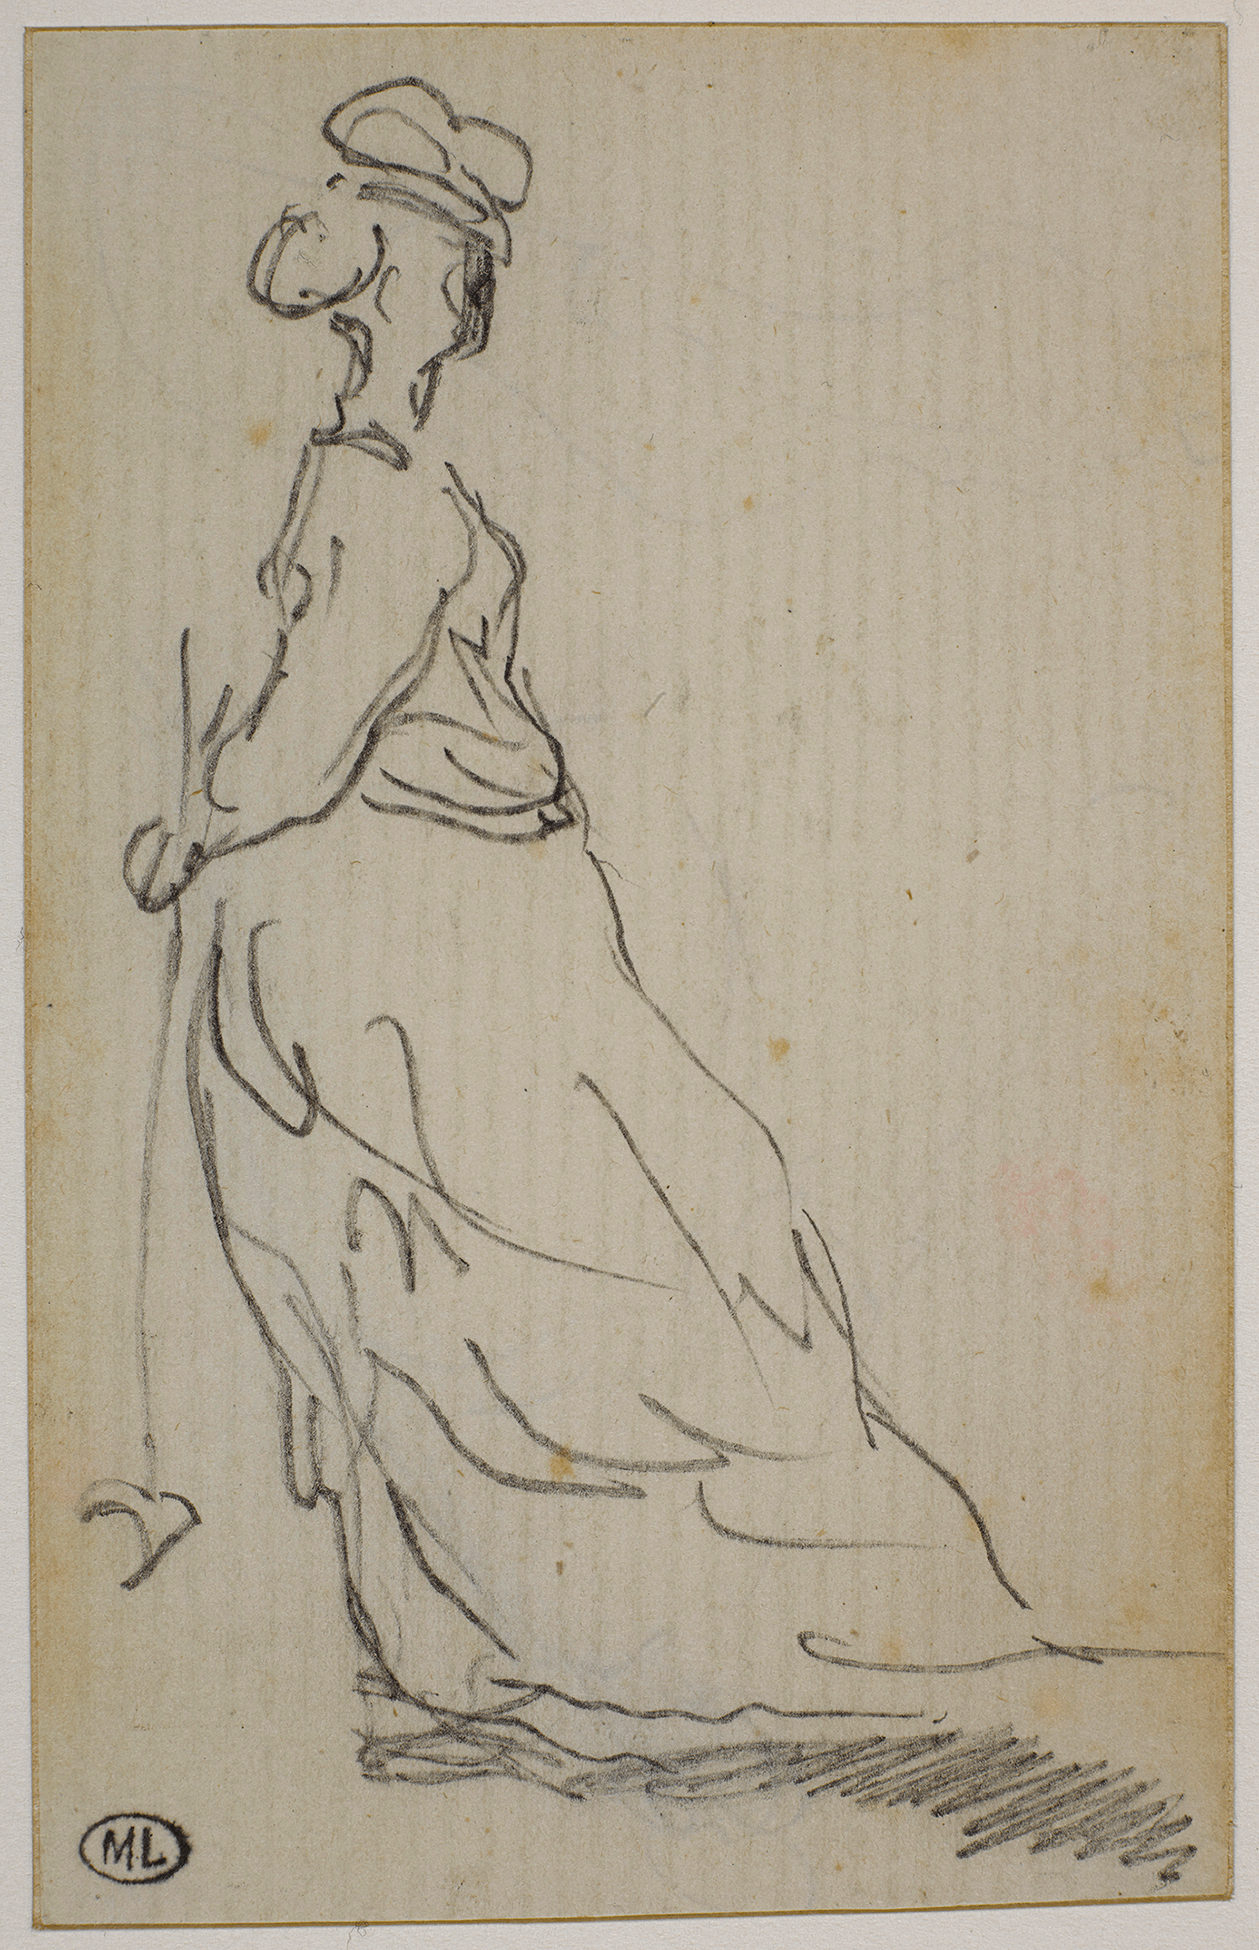 A sketch of an outline of a female figure with a long dress.